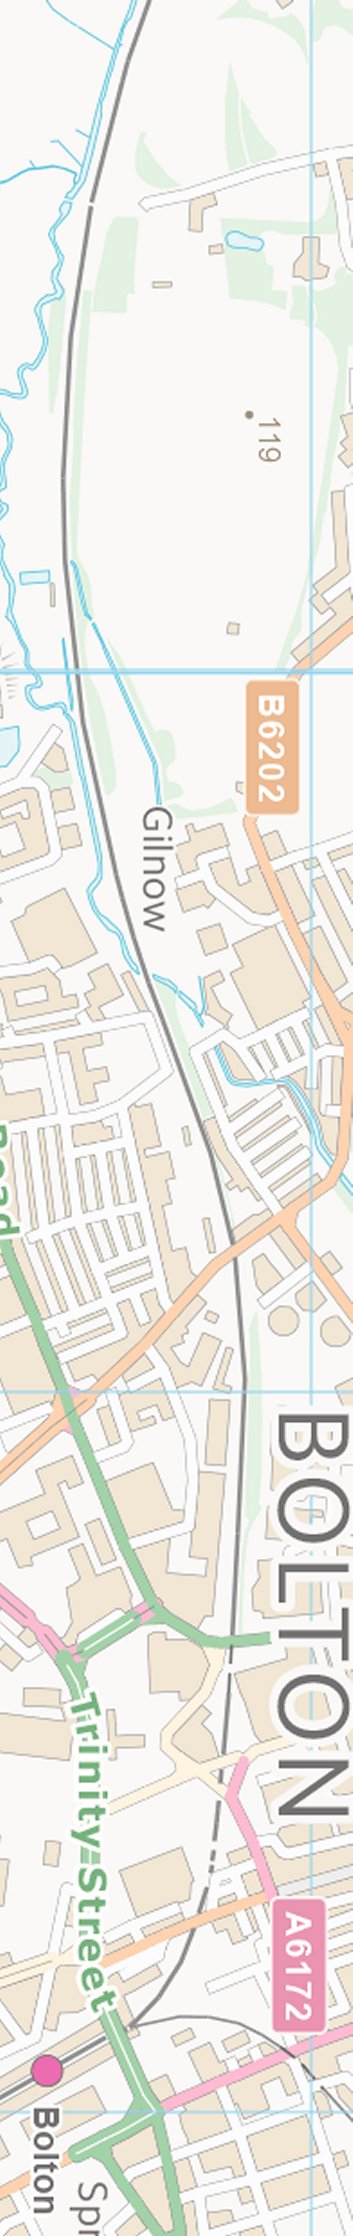 Section from the Ordnance Survey OpenSource mapping 2013 showing L&YR railway line in West Bolton